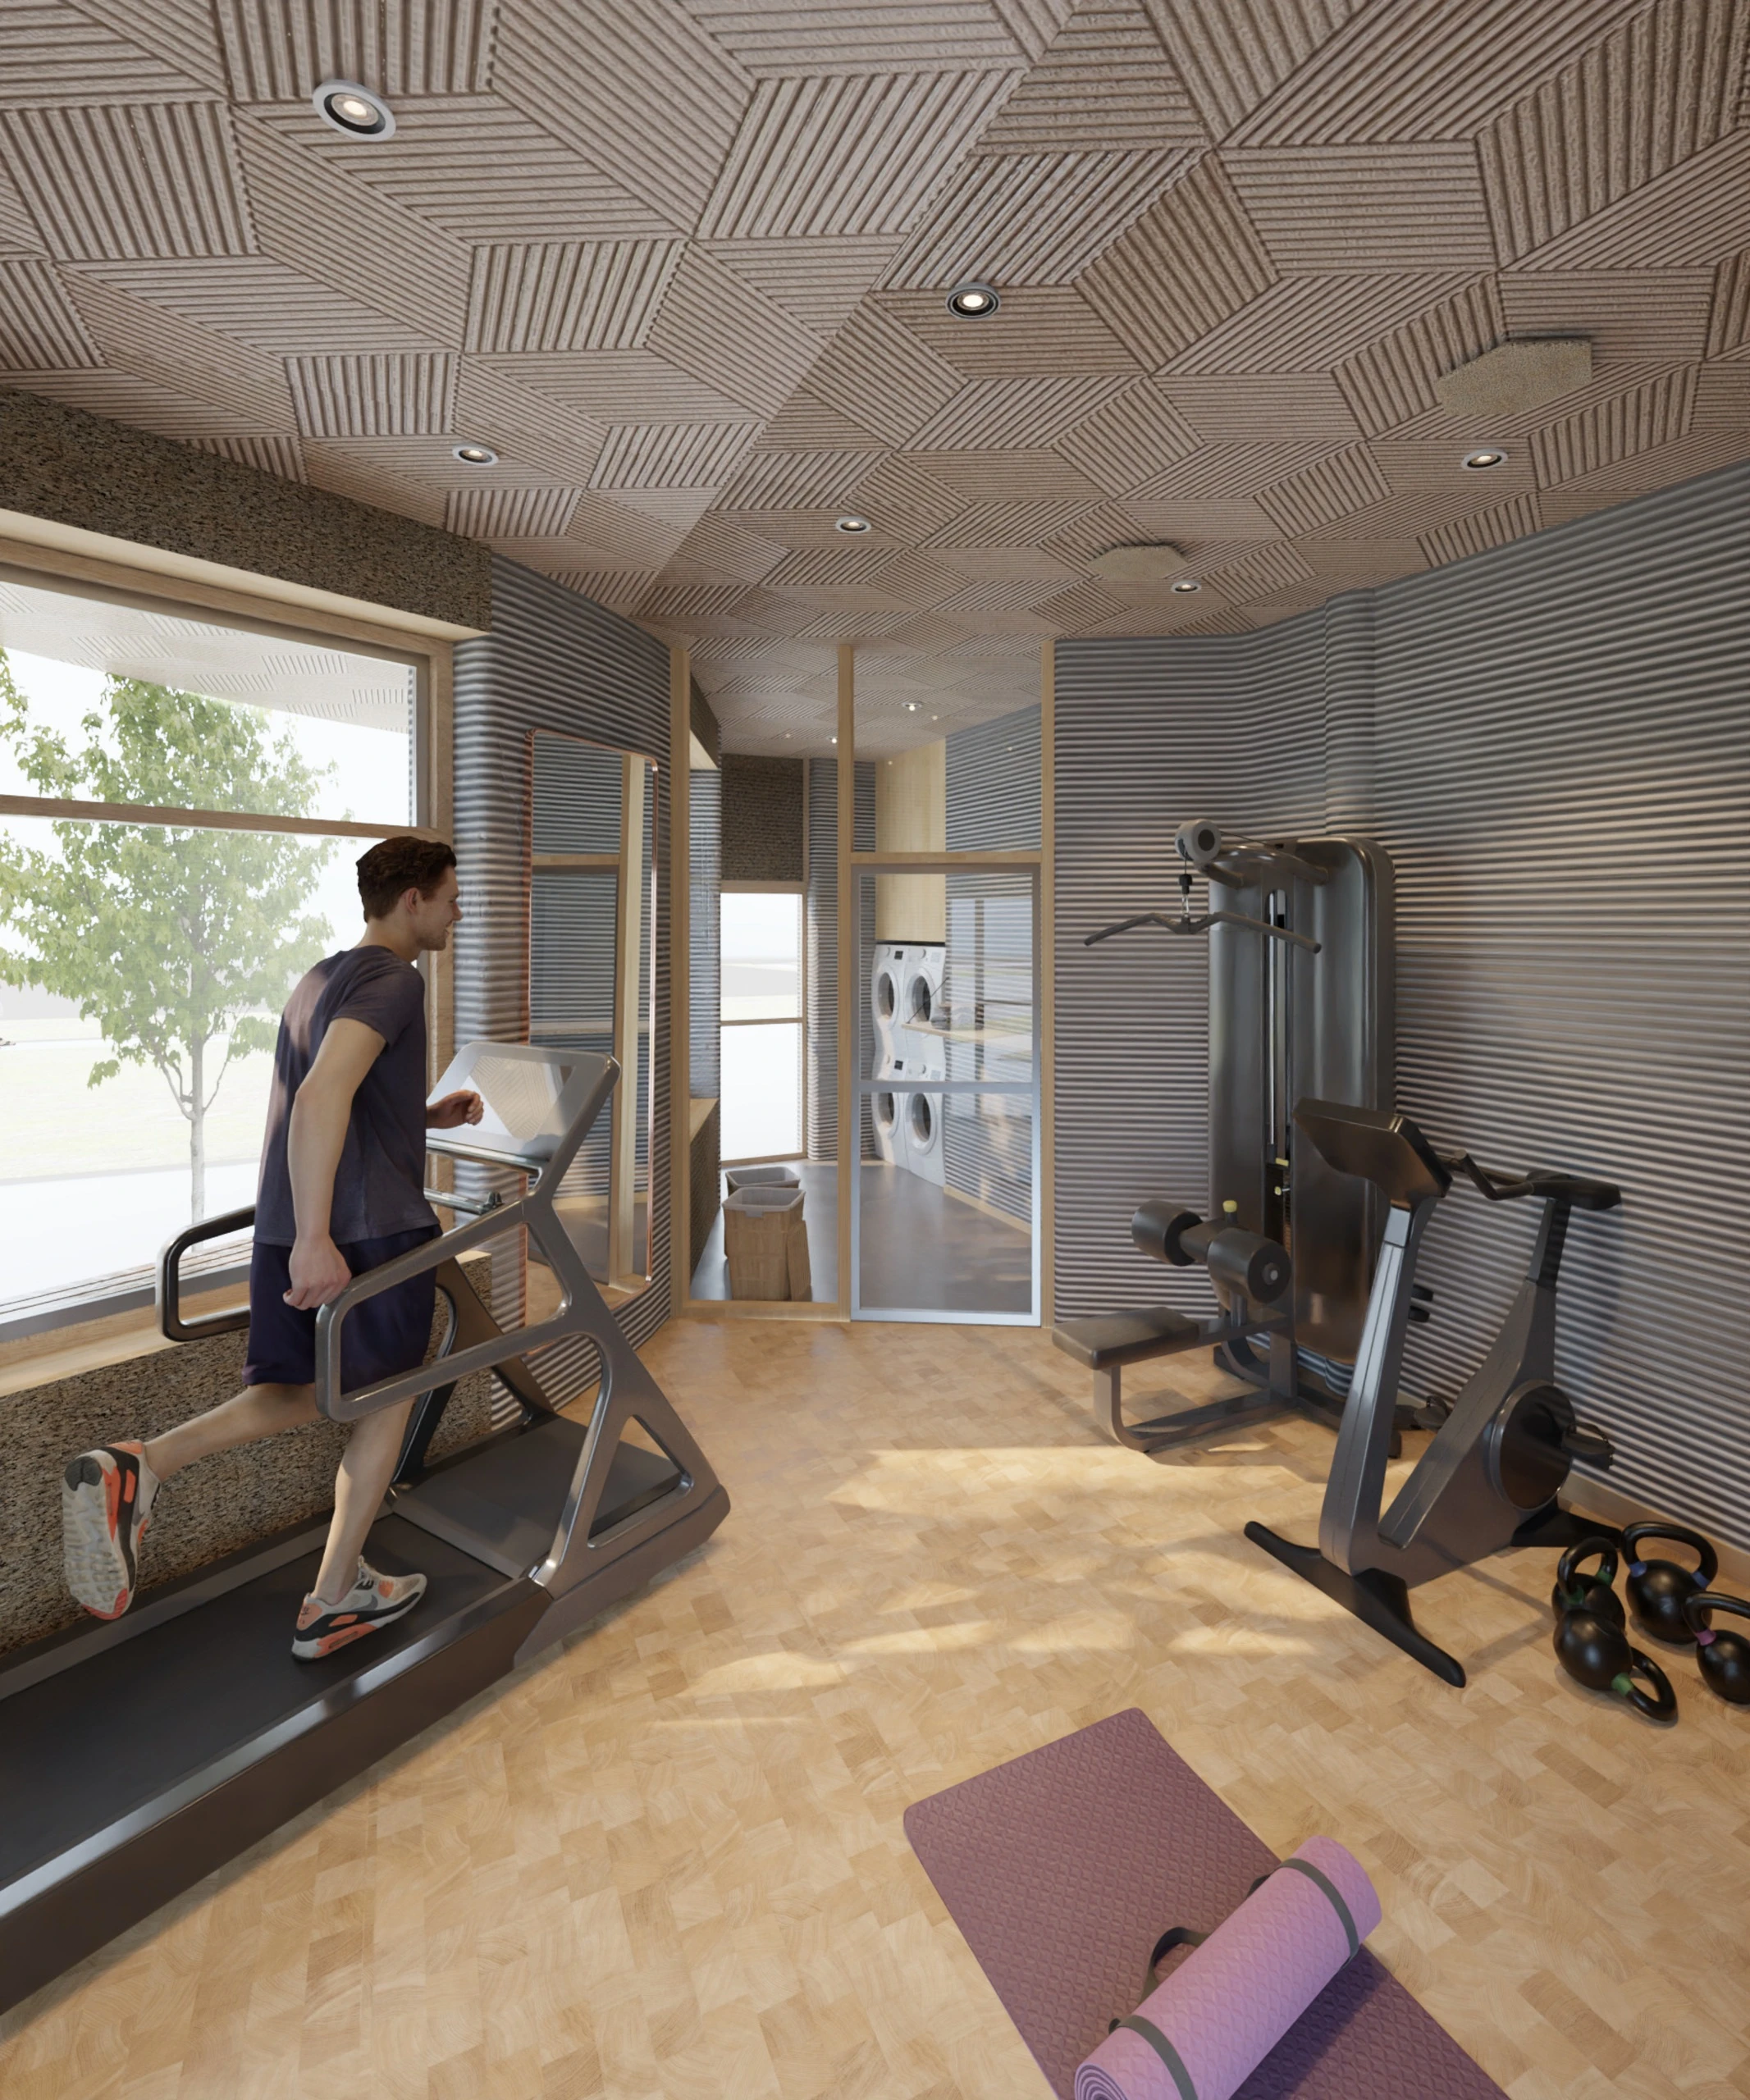 Render of the 3D-printed Community House interior, fitness room